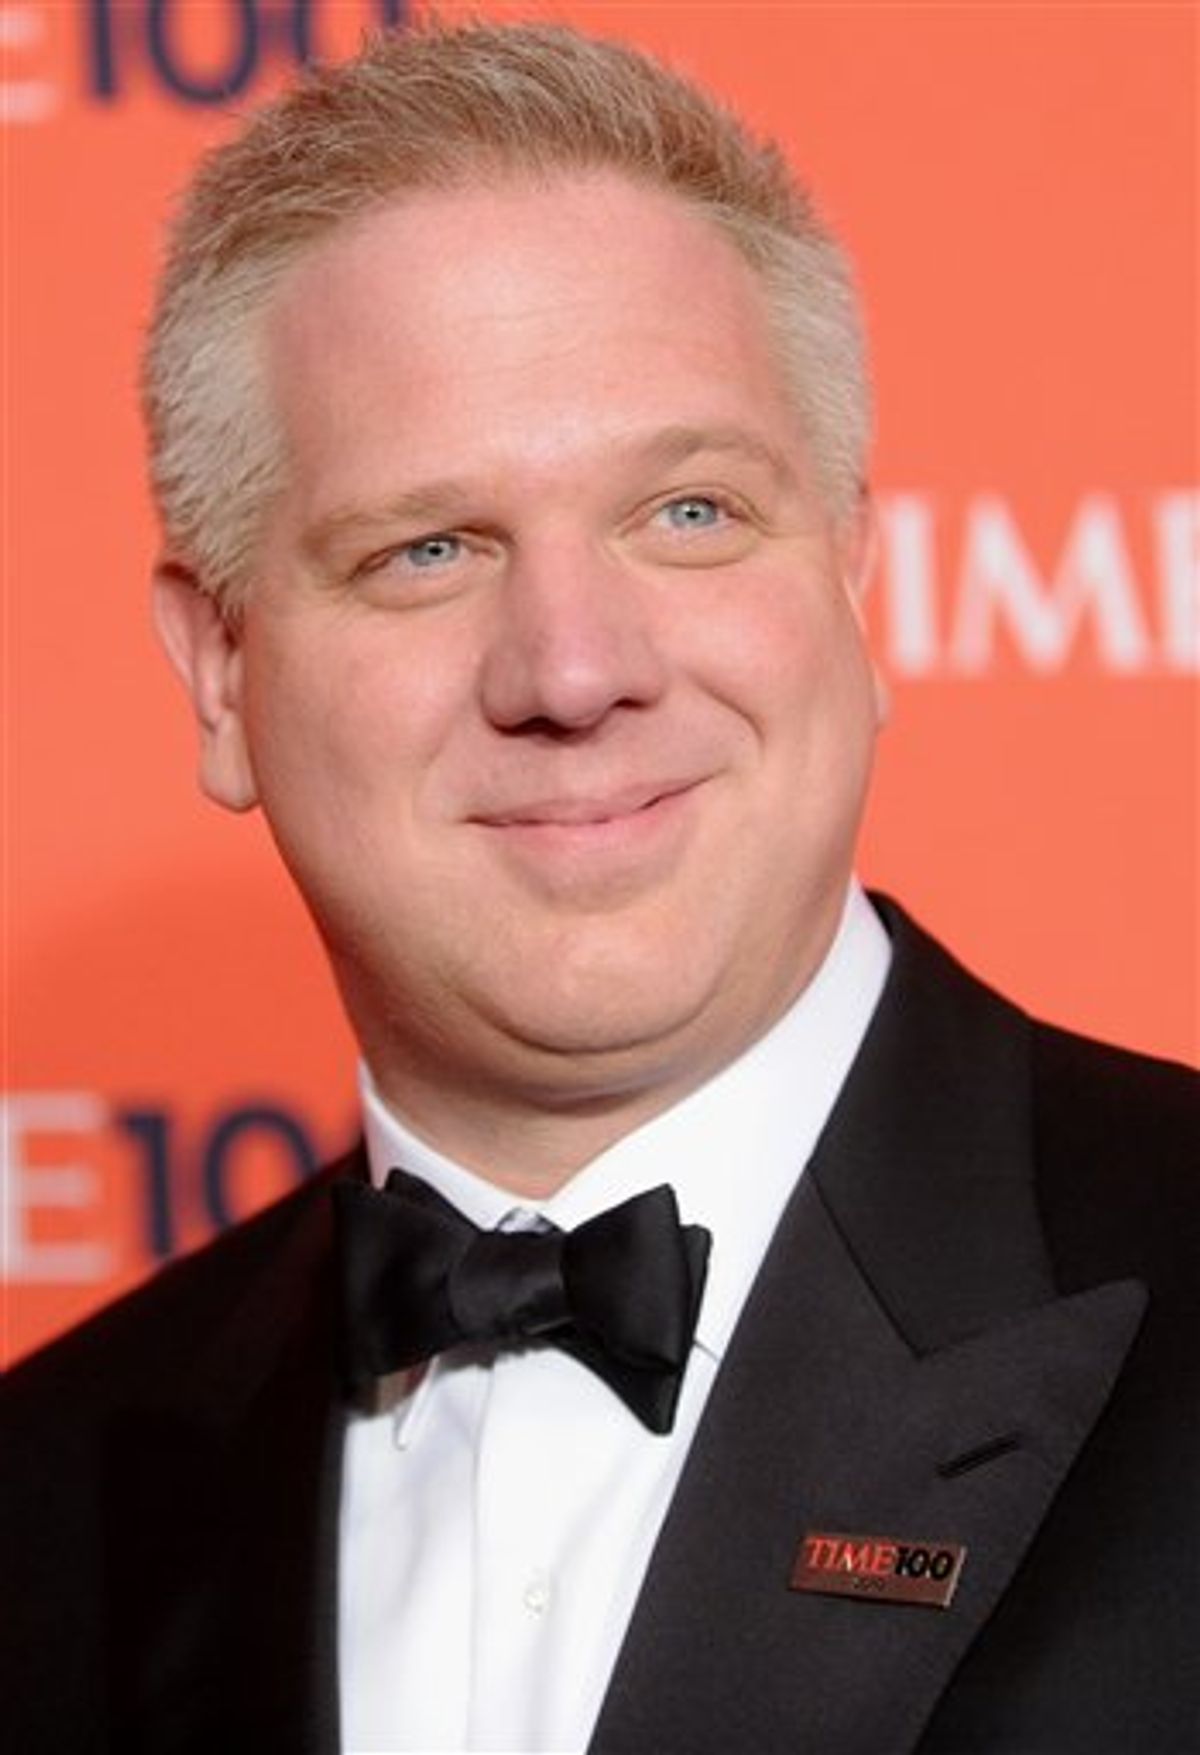 FILE - In this May 4, 2010 file photo, Glenn Beck attends the TIME 100 gala celebrating the 100 most influential people, at the Time Warner Center in New York. Beck, who burned bright and fast at Fox News Channel, does his final show on the network Thursday before going into business for himself. (AP Photo/Evan Agostini, file) (AP)